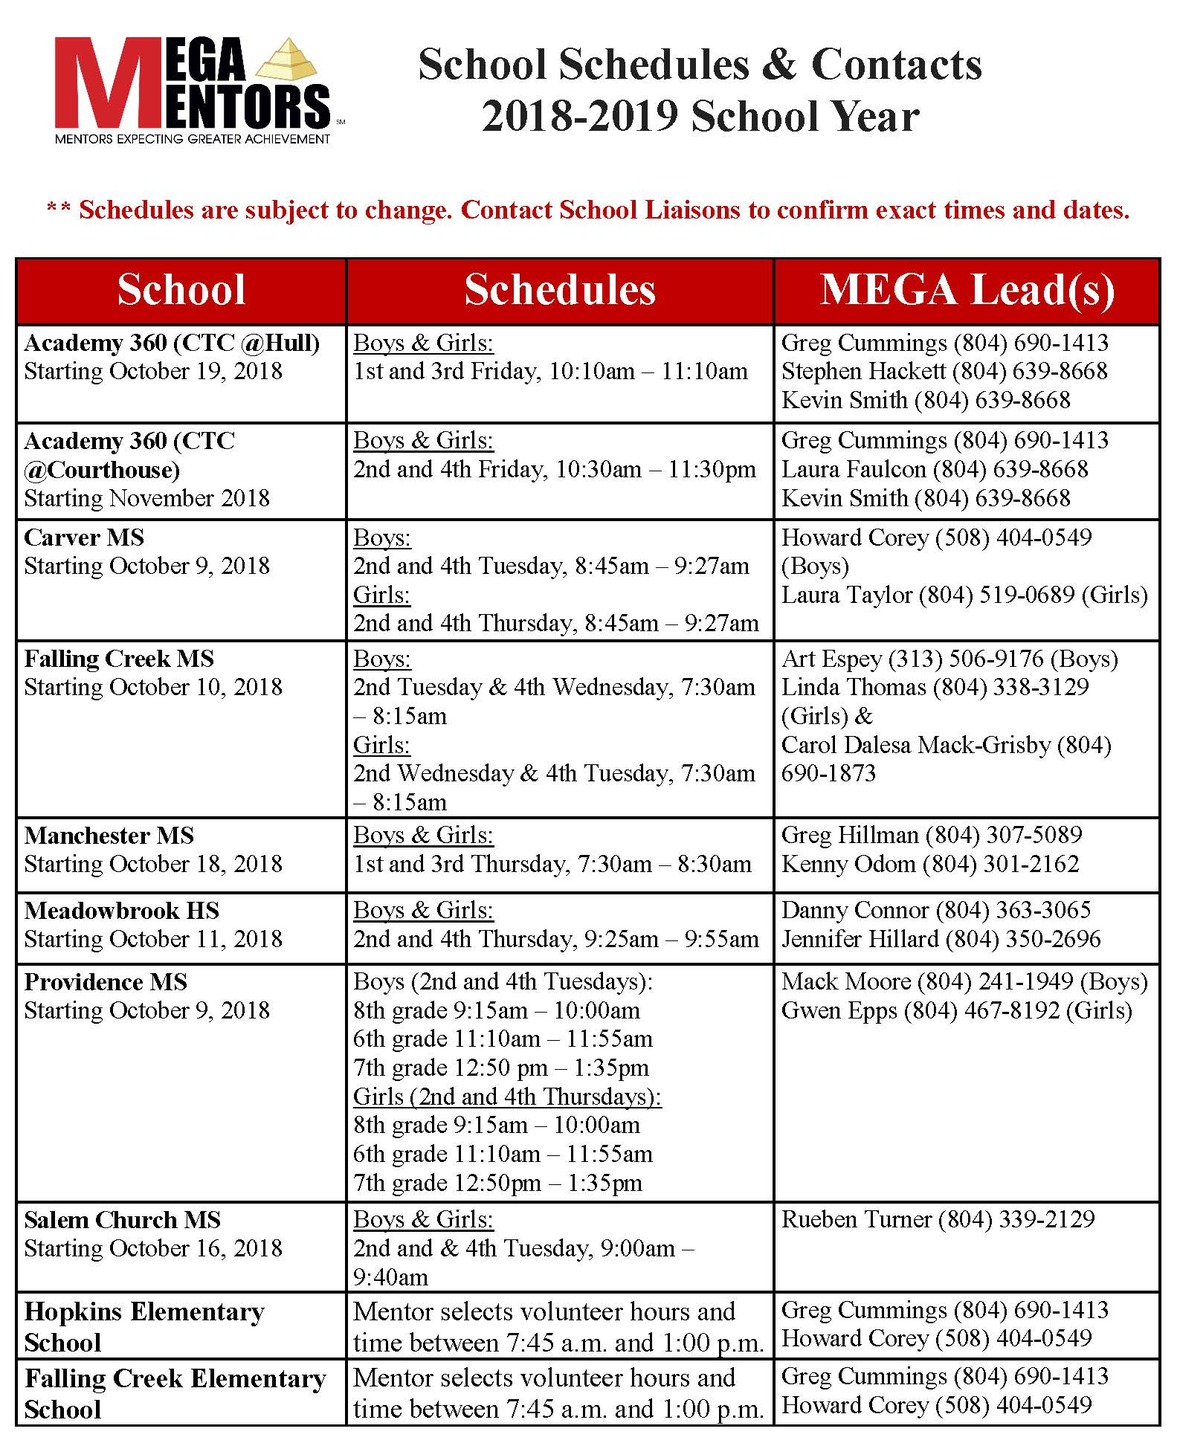 MEGA School Schedules and Contacts 2018-2019 for newsletter Nov 2018